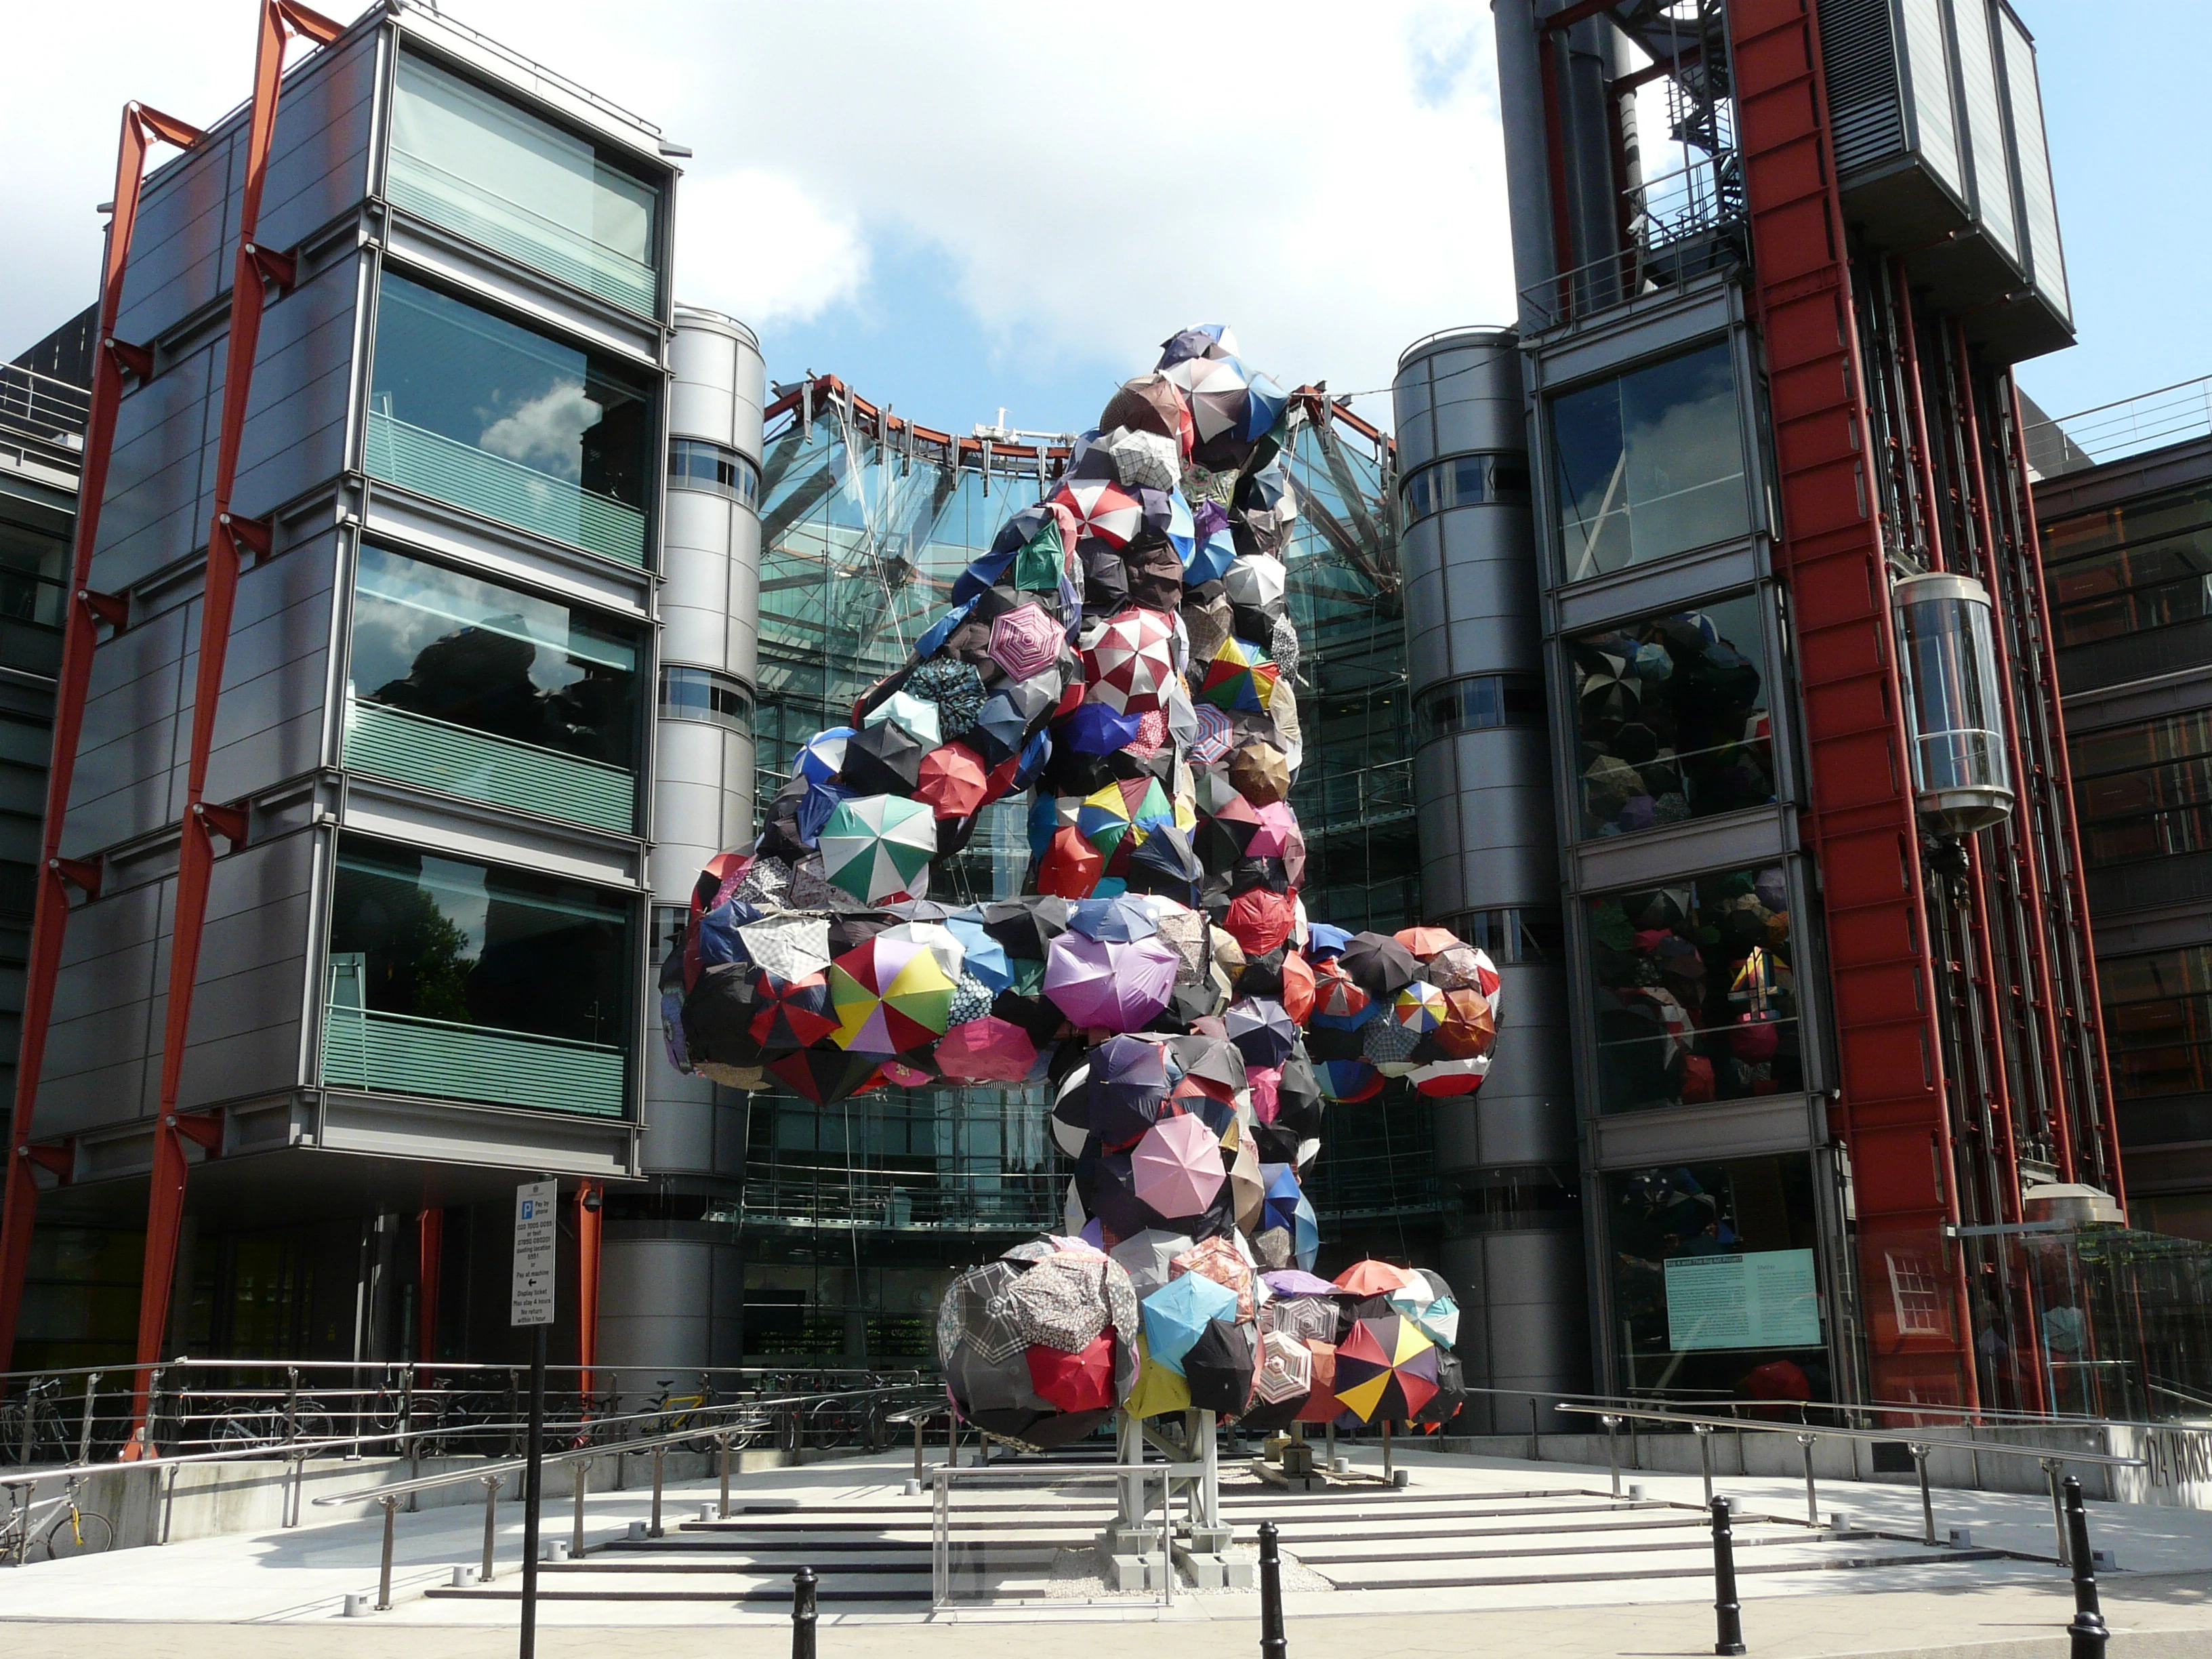 'Shelter' by Stephanie Imbeau, Channel 4 HQ, Horseferry Road